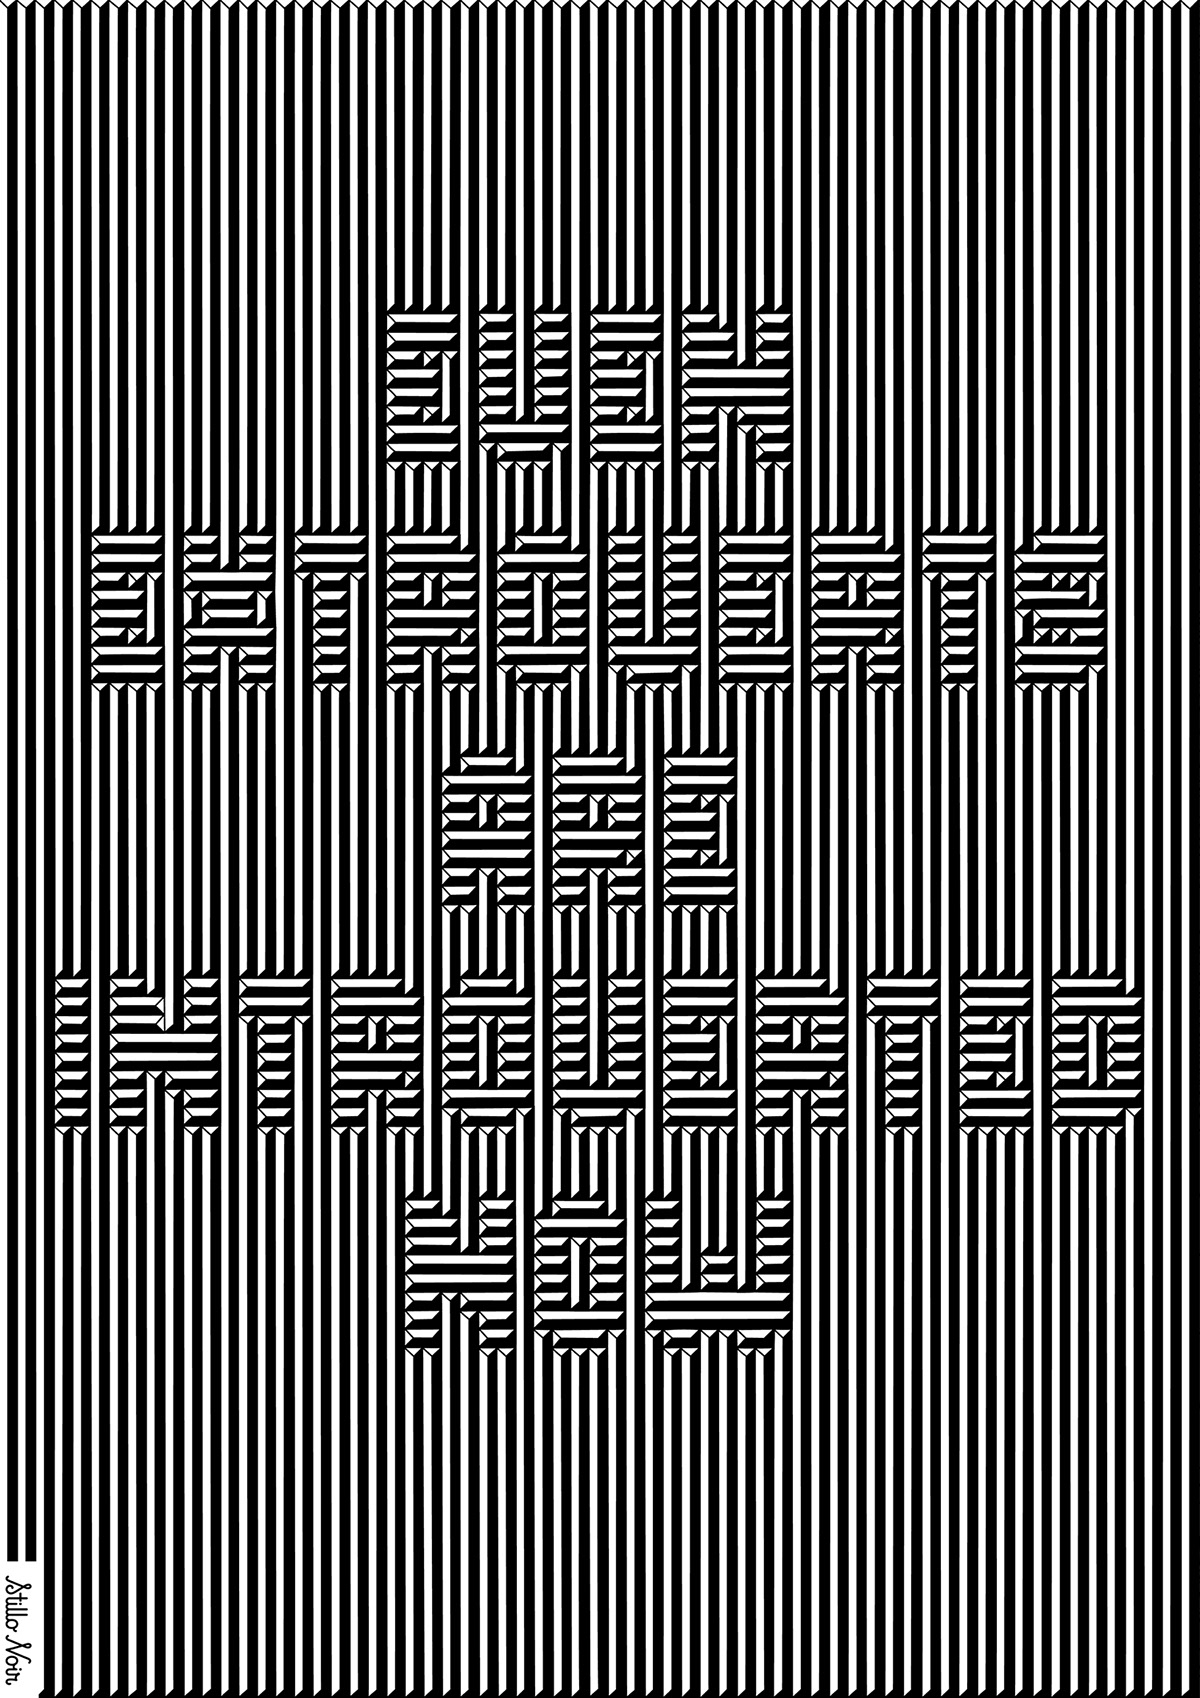 A hand-lettered black and white phrase camouflaging into a dimensional geometric abstract pattern